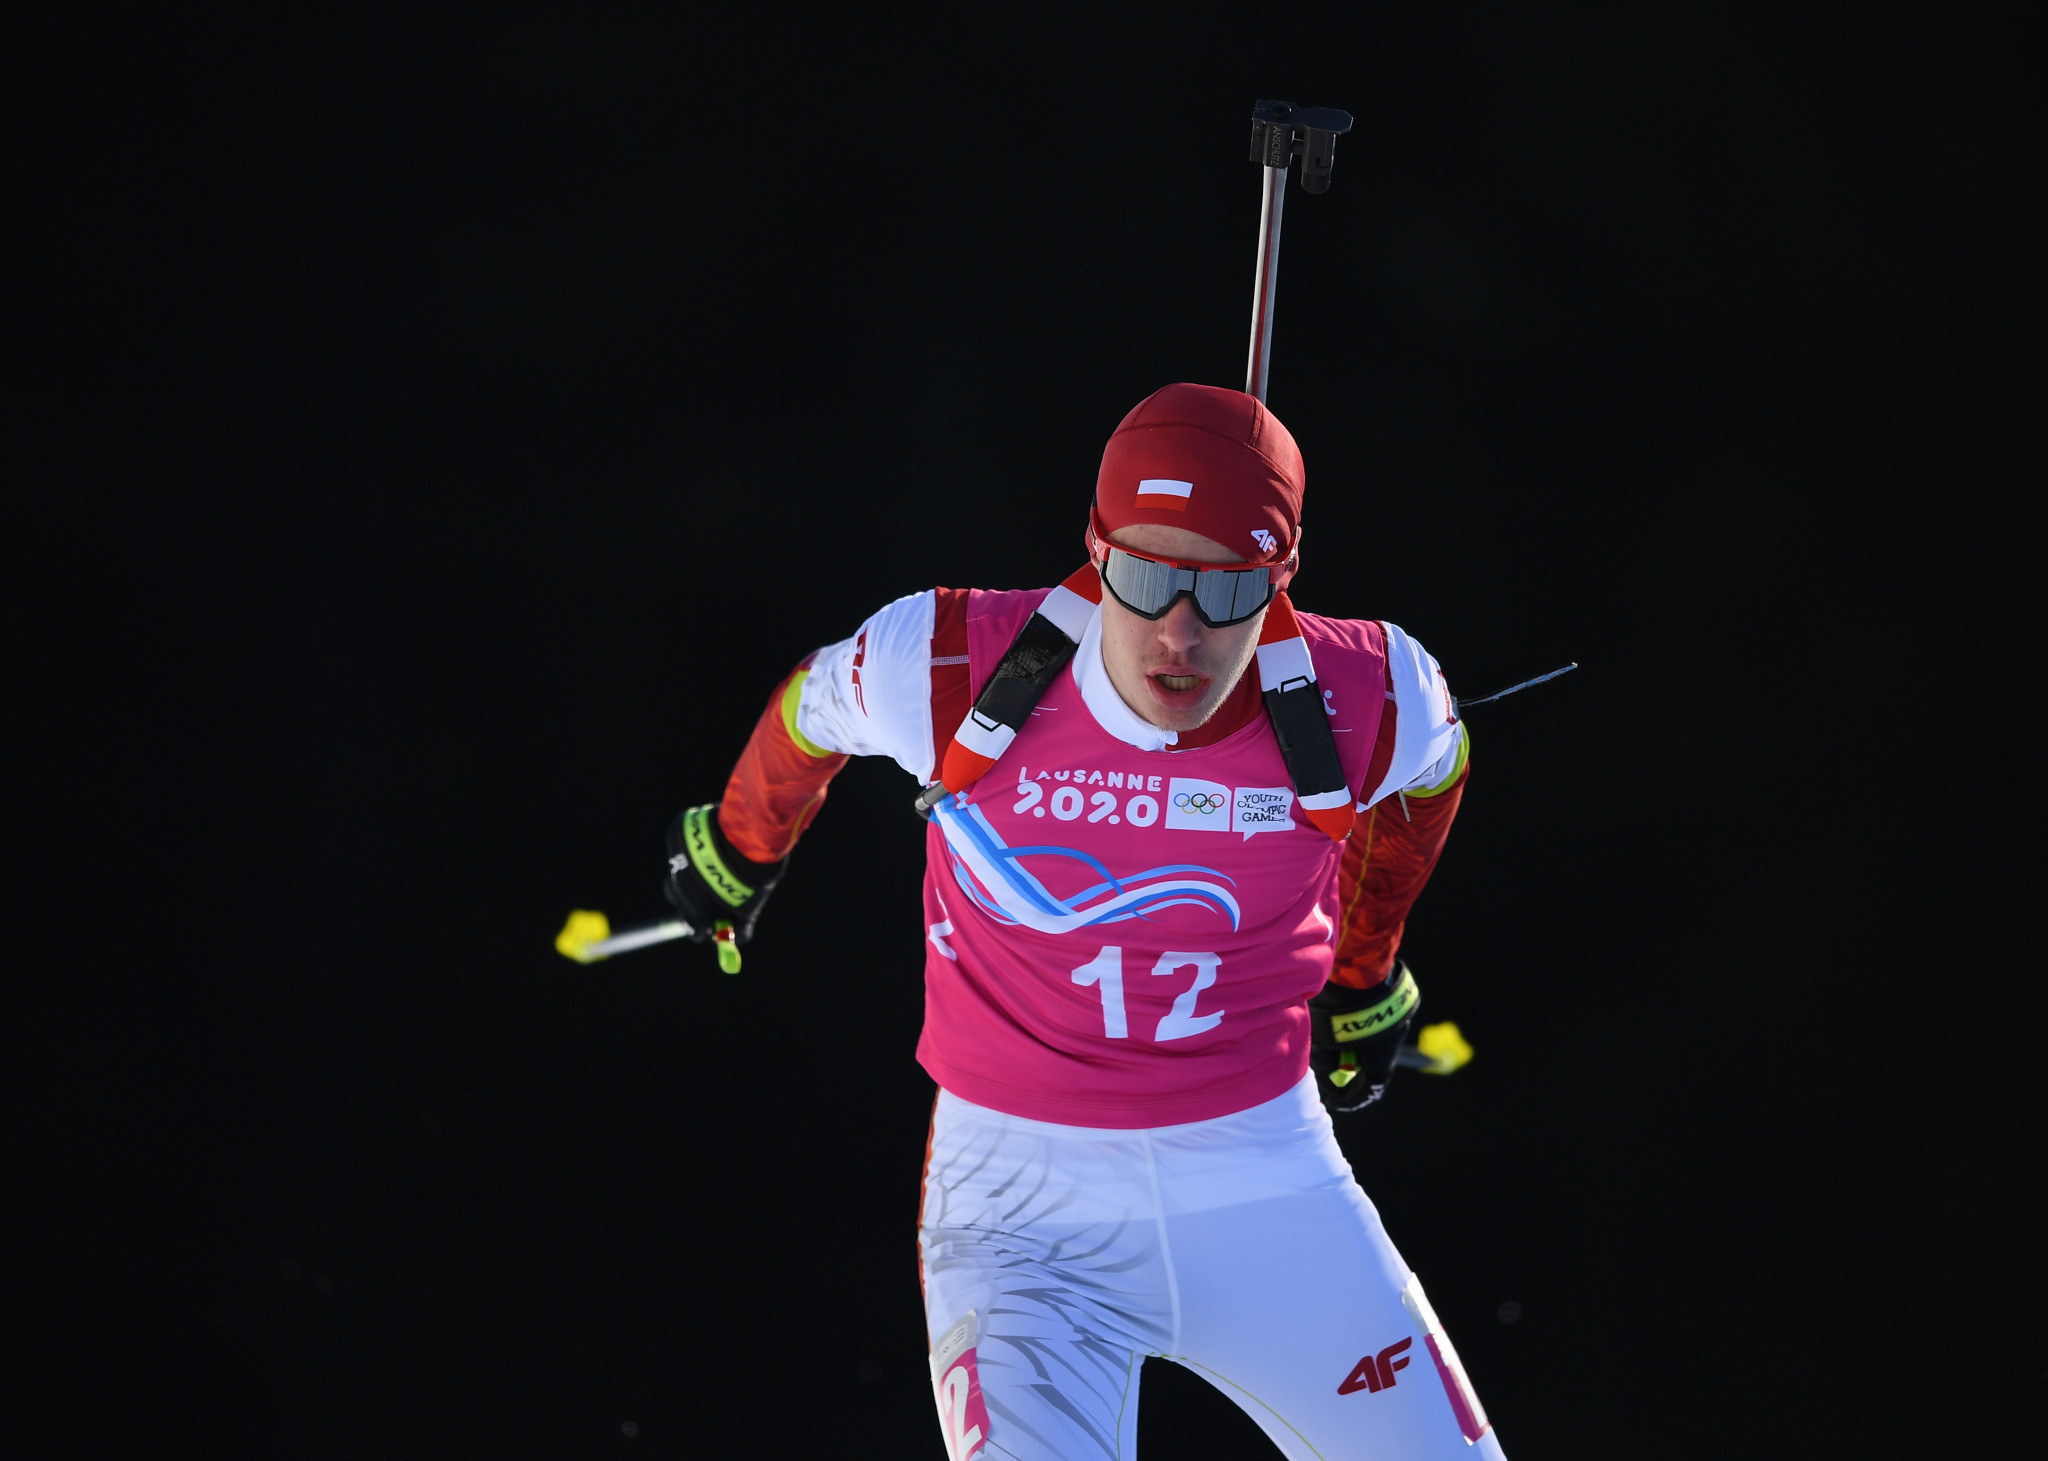 Marcin Zawol completed the final leg of the men's youth relay to help Poland win gold in Austria ©Getty Images